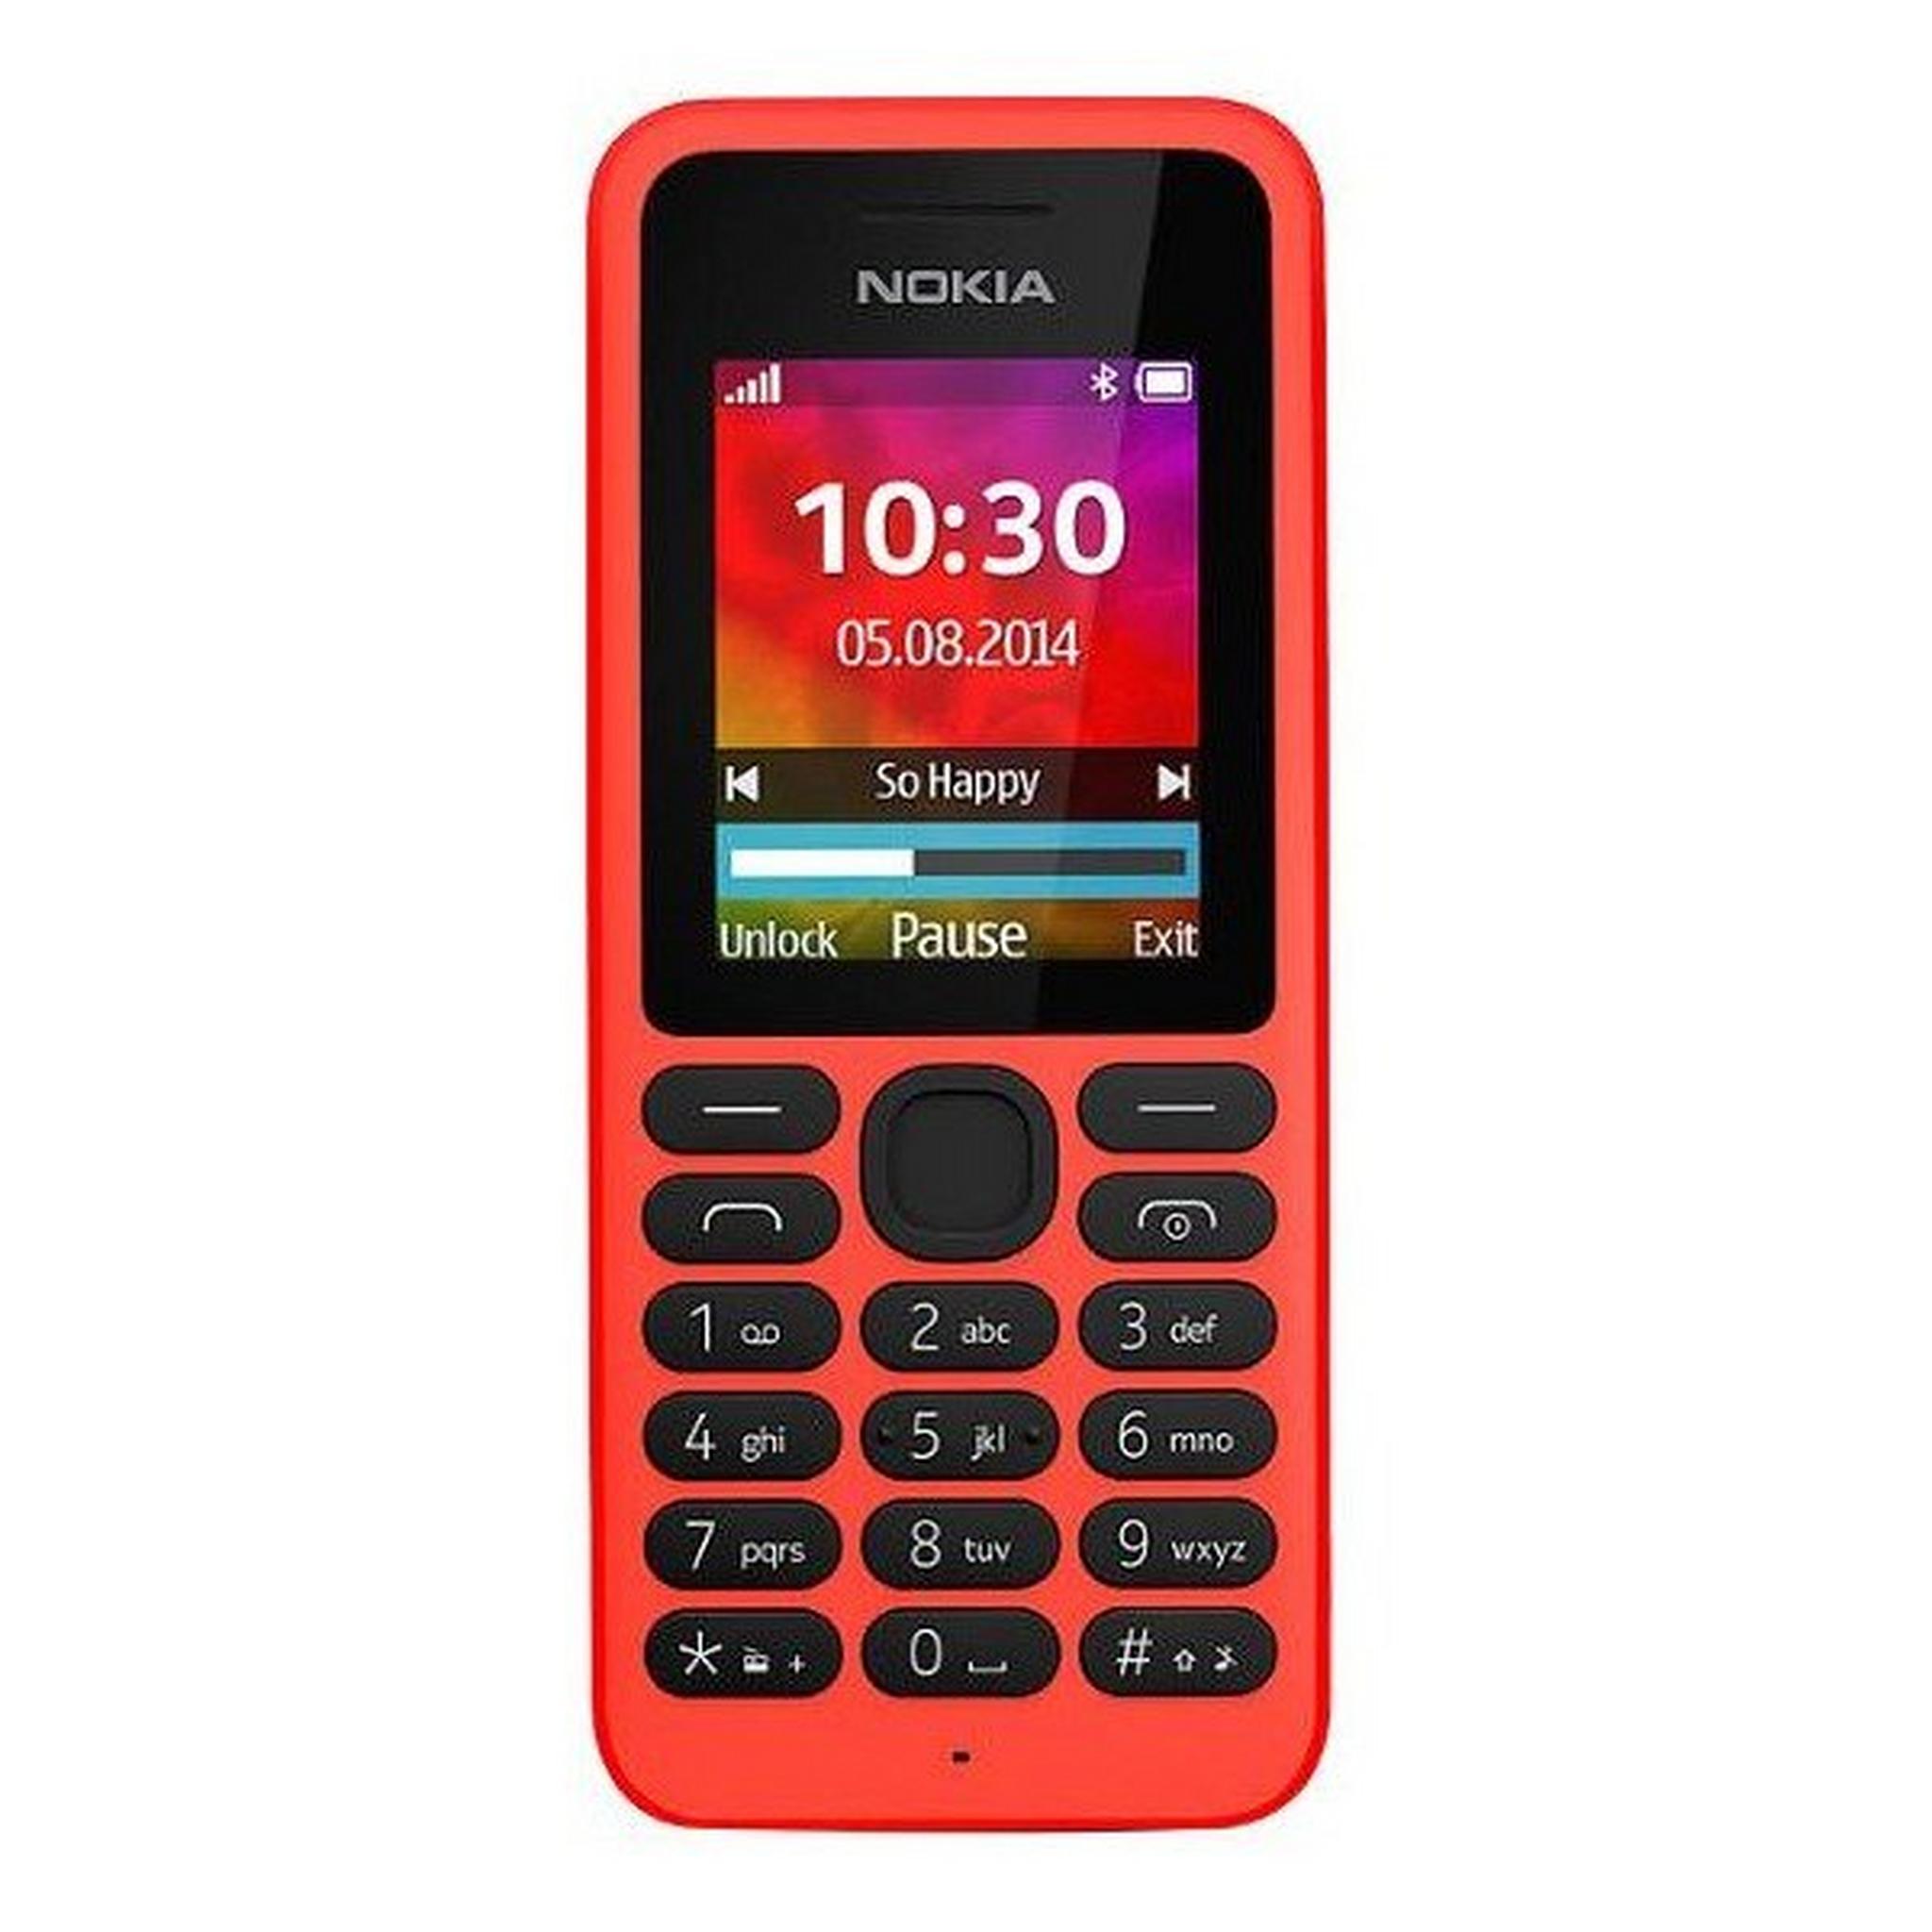 Nokia 130 Dual SIM Feature Phone 1.8-inch - Red